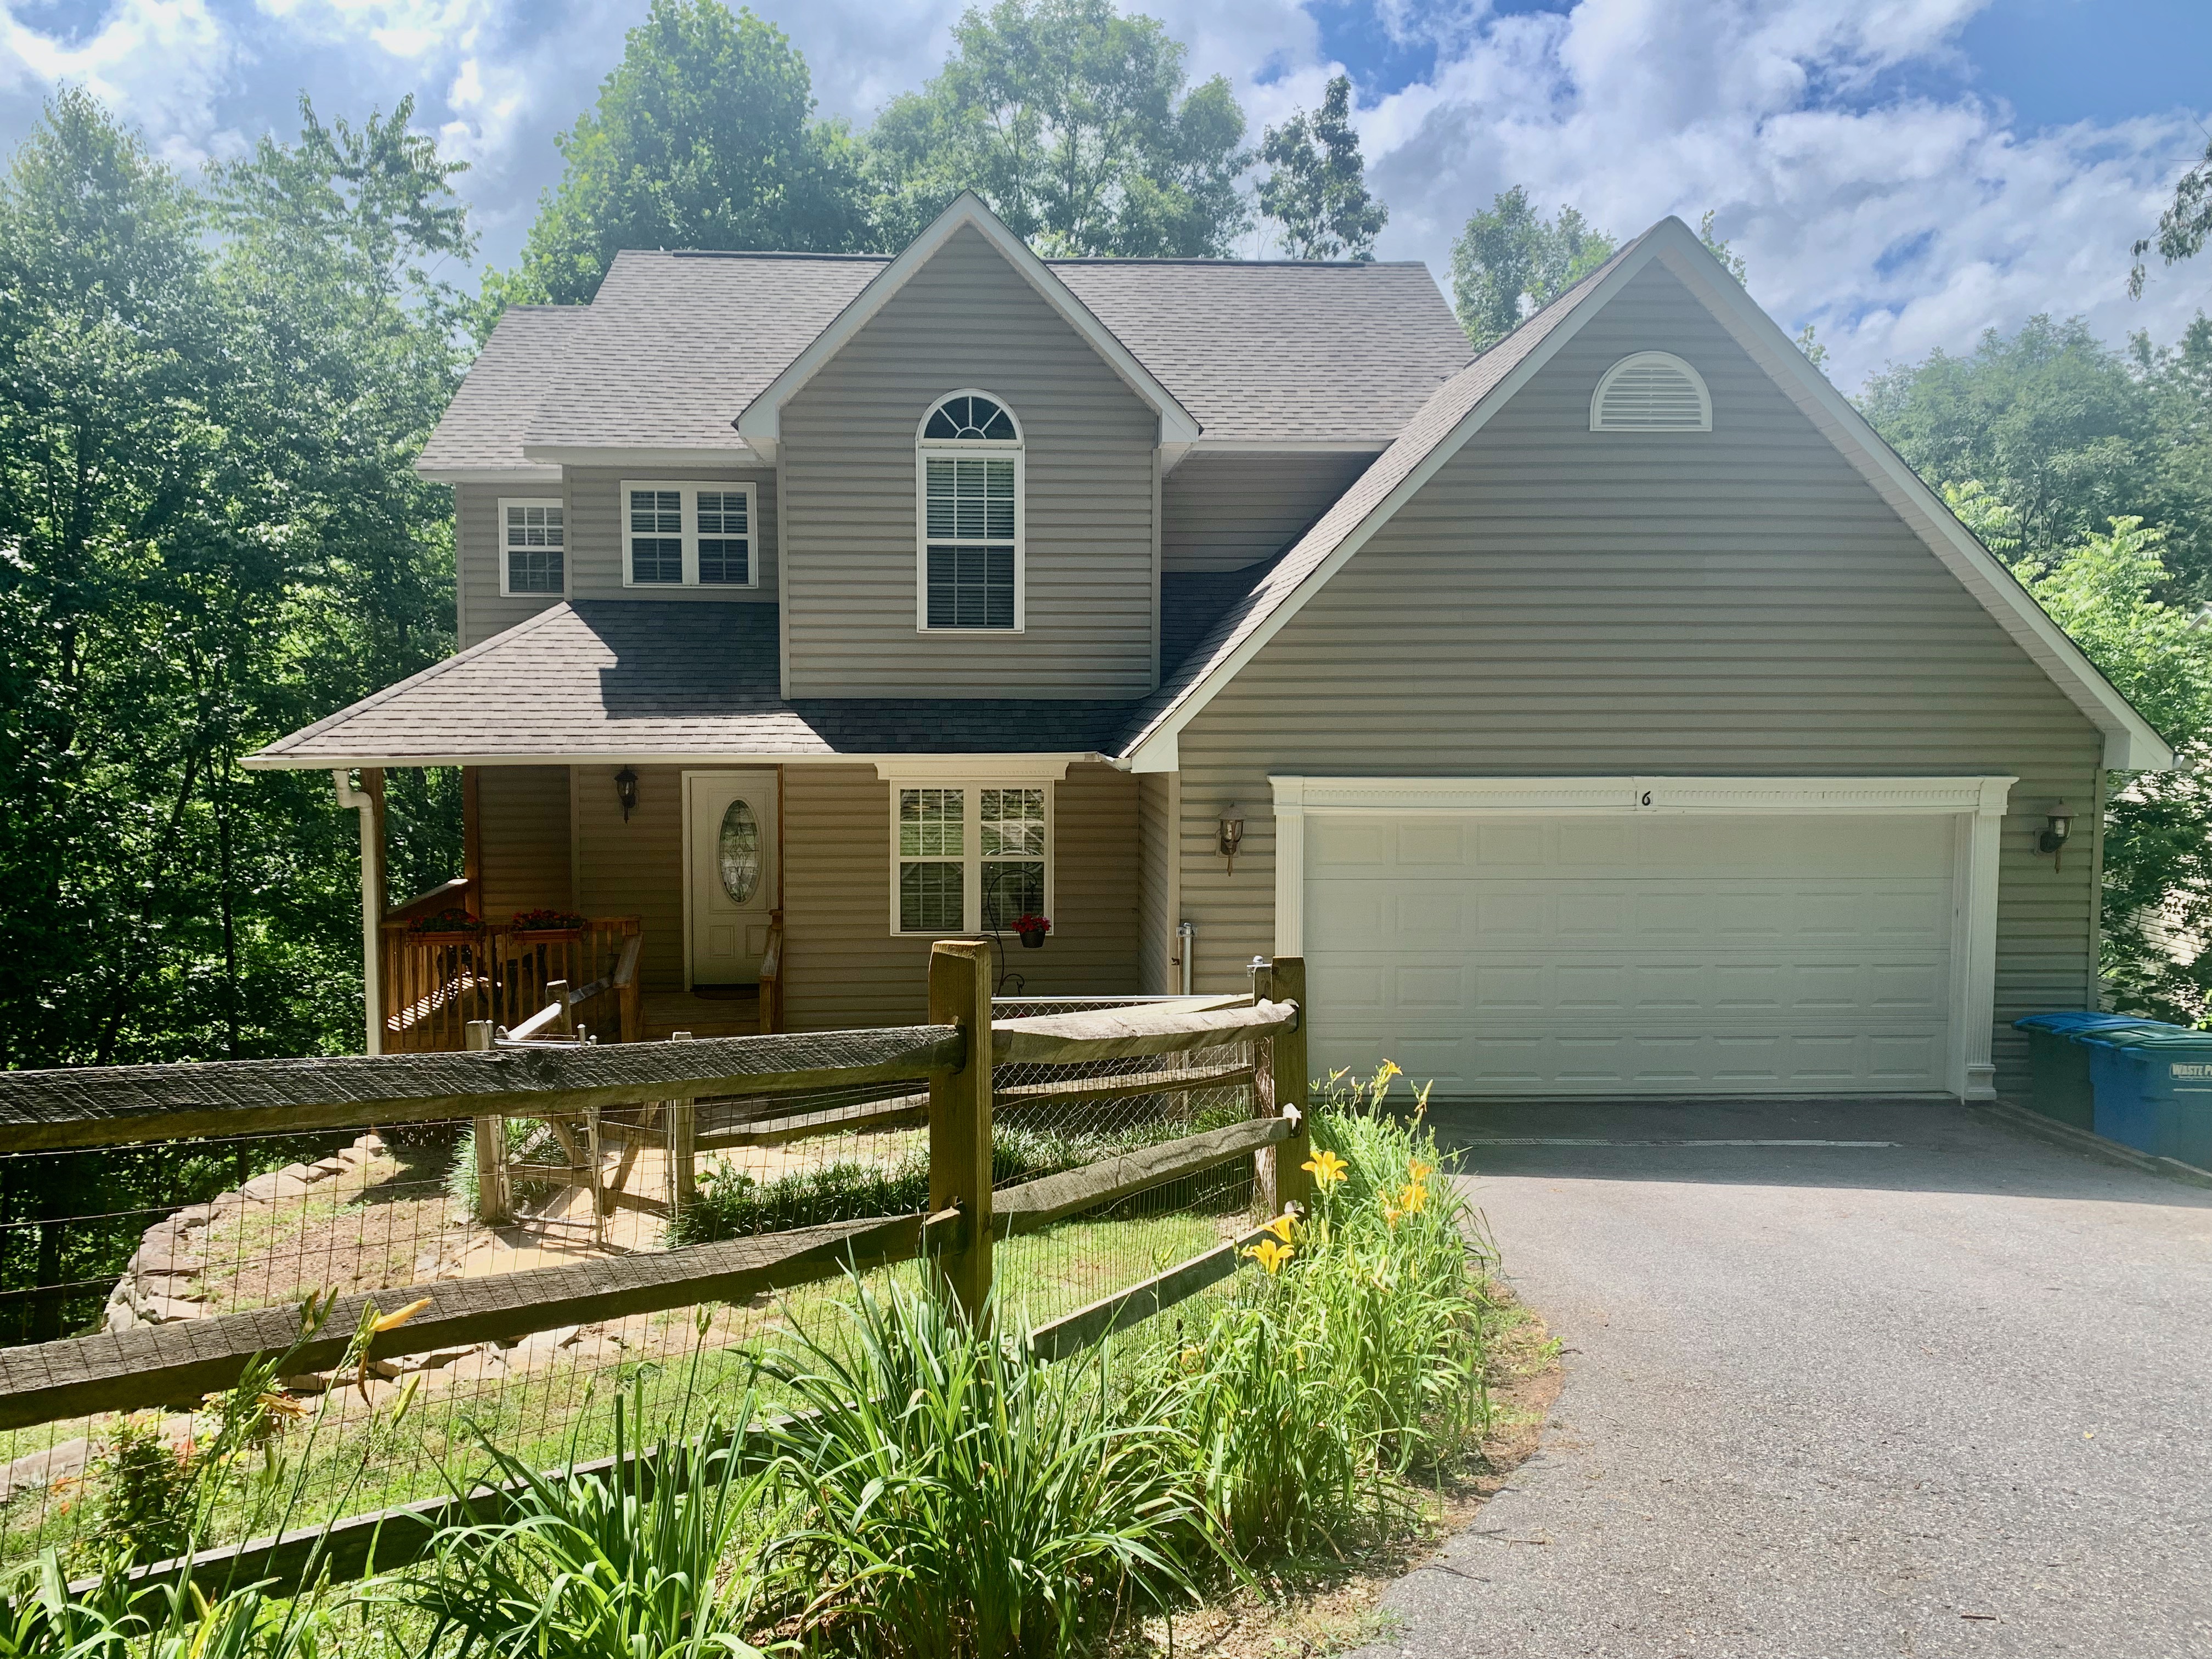 SOLD! 6 Kims Court, Fairview, NC 28730